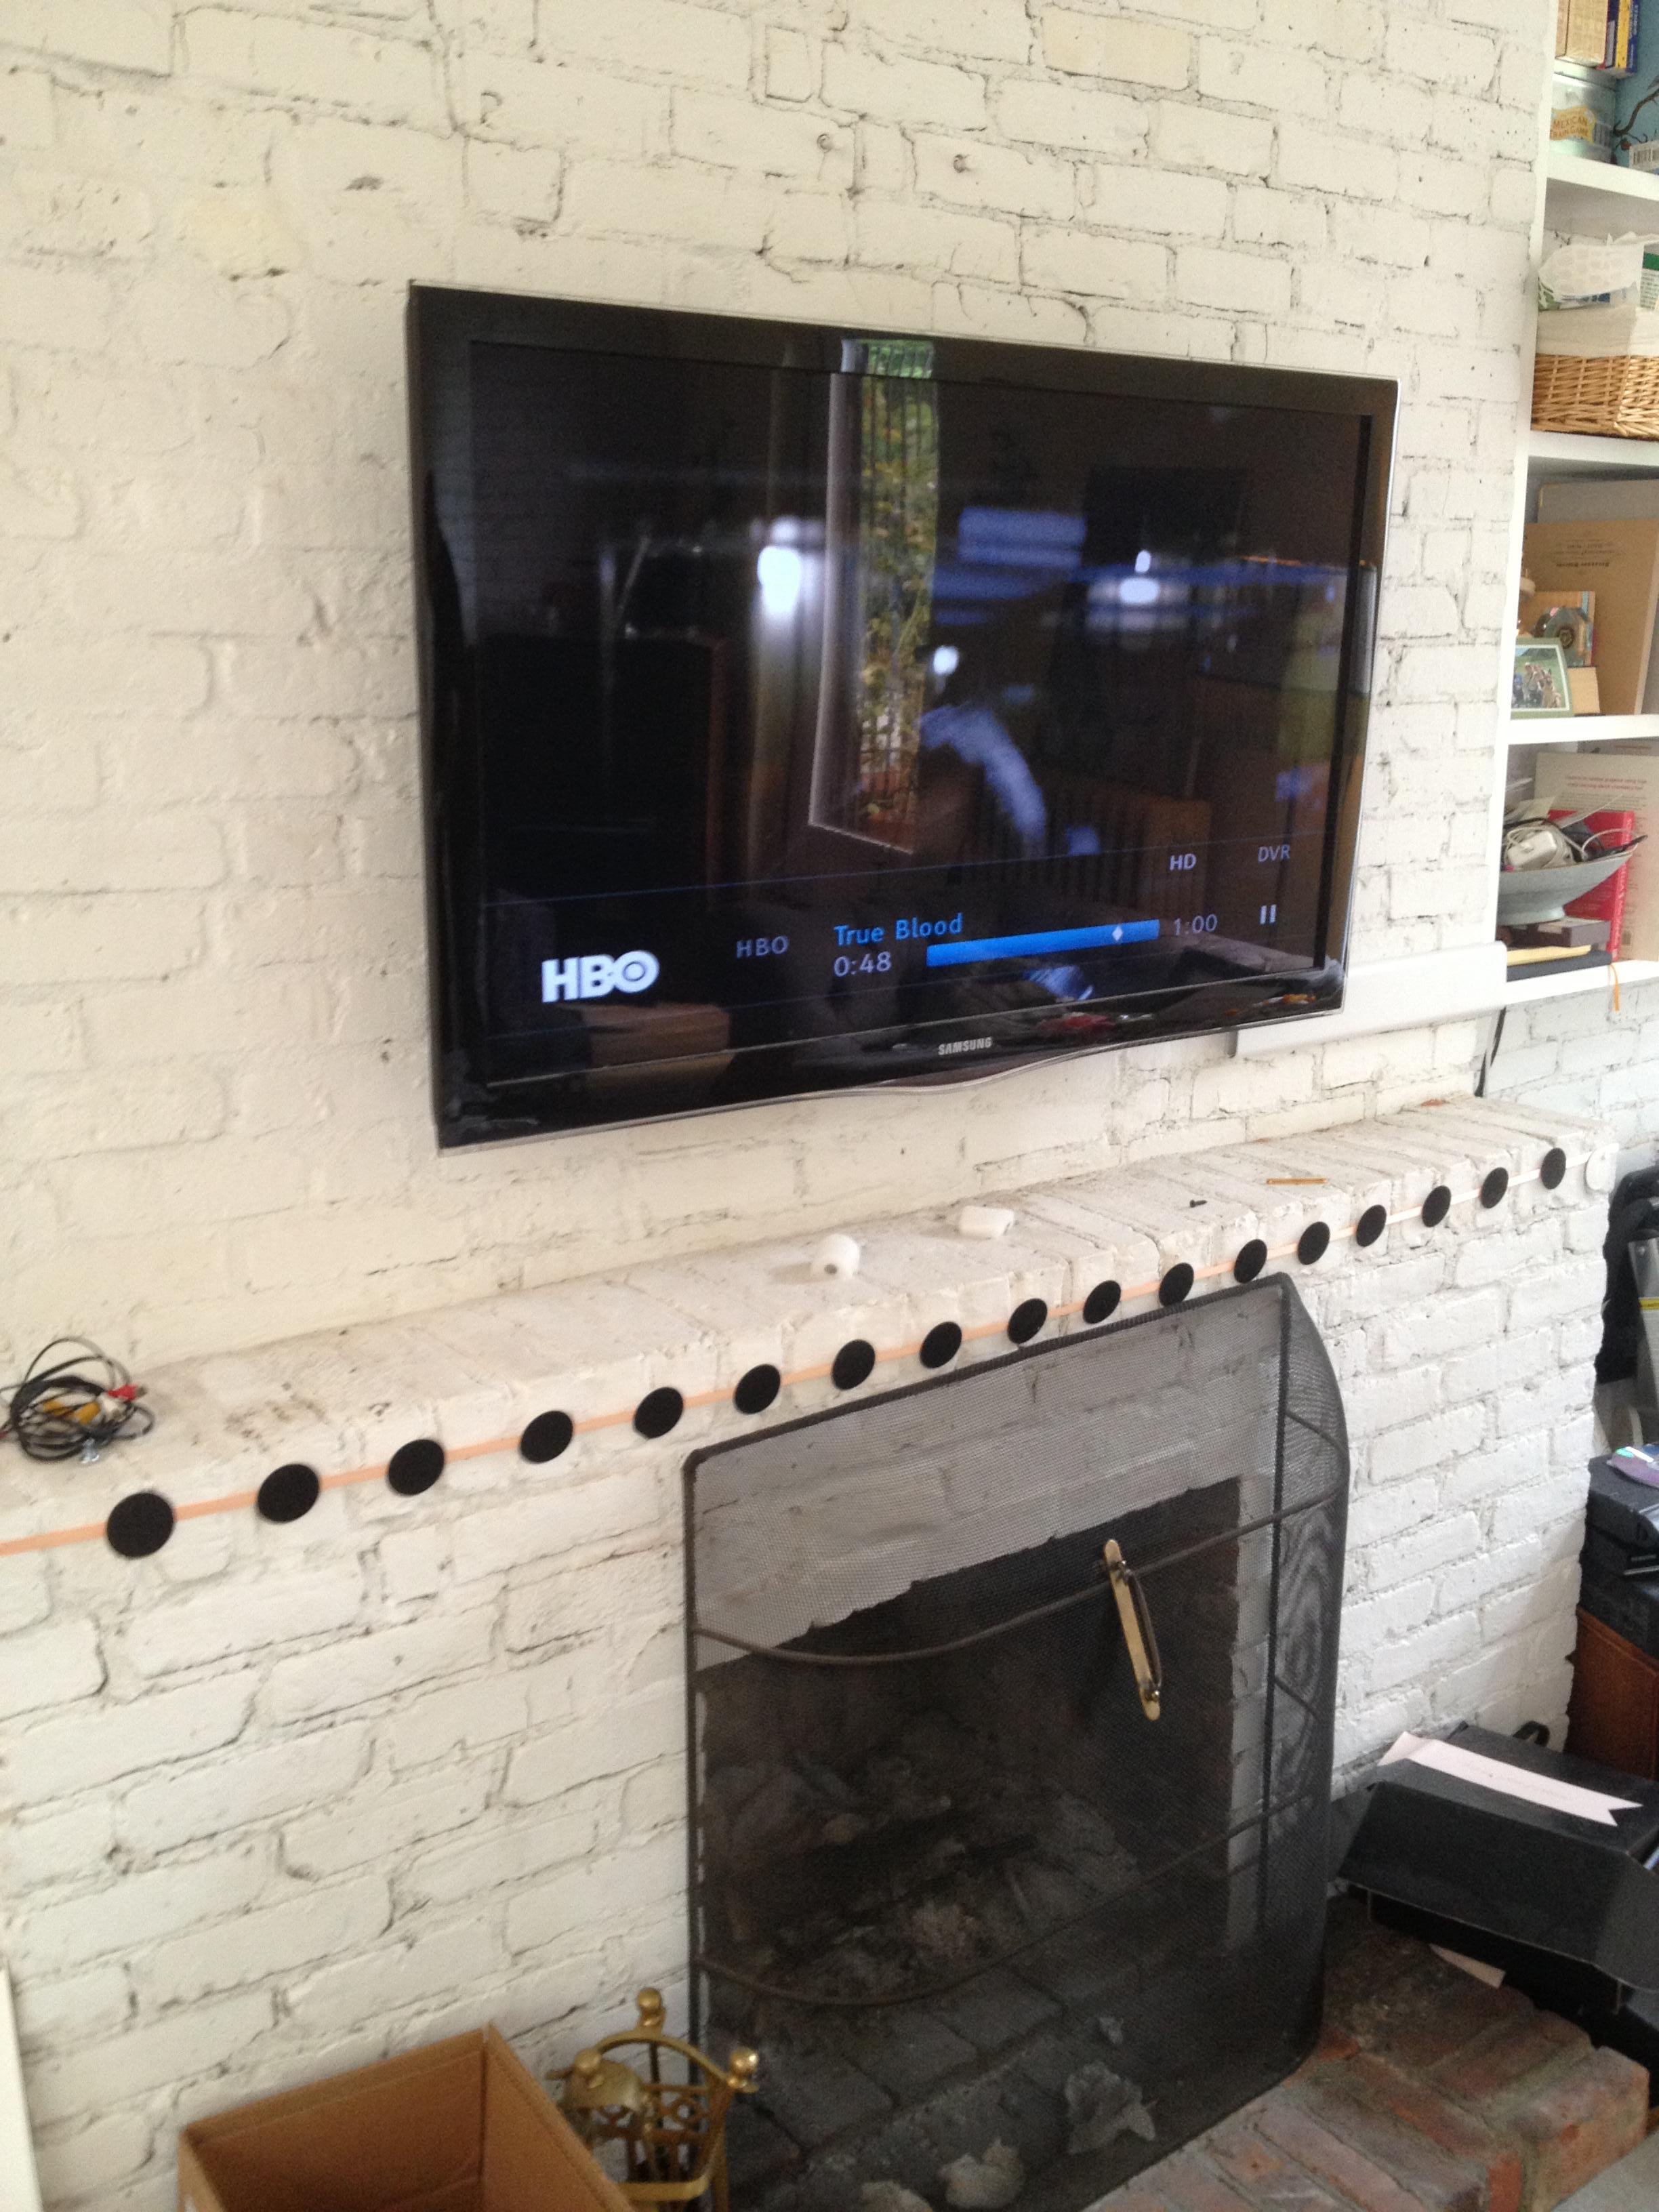 Vesta TV Installation over a Fireplace Pictures